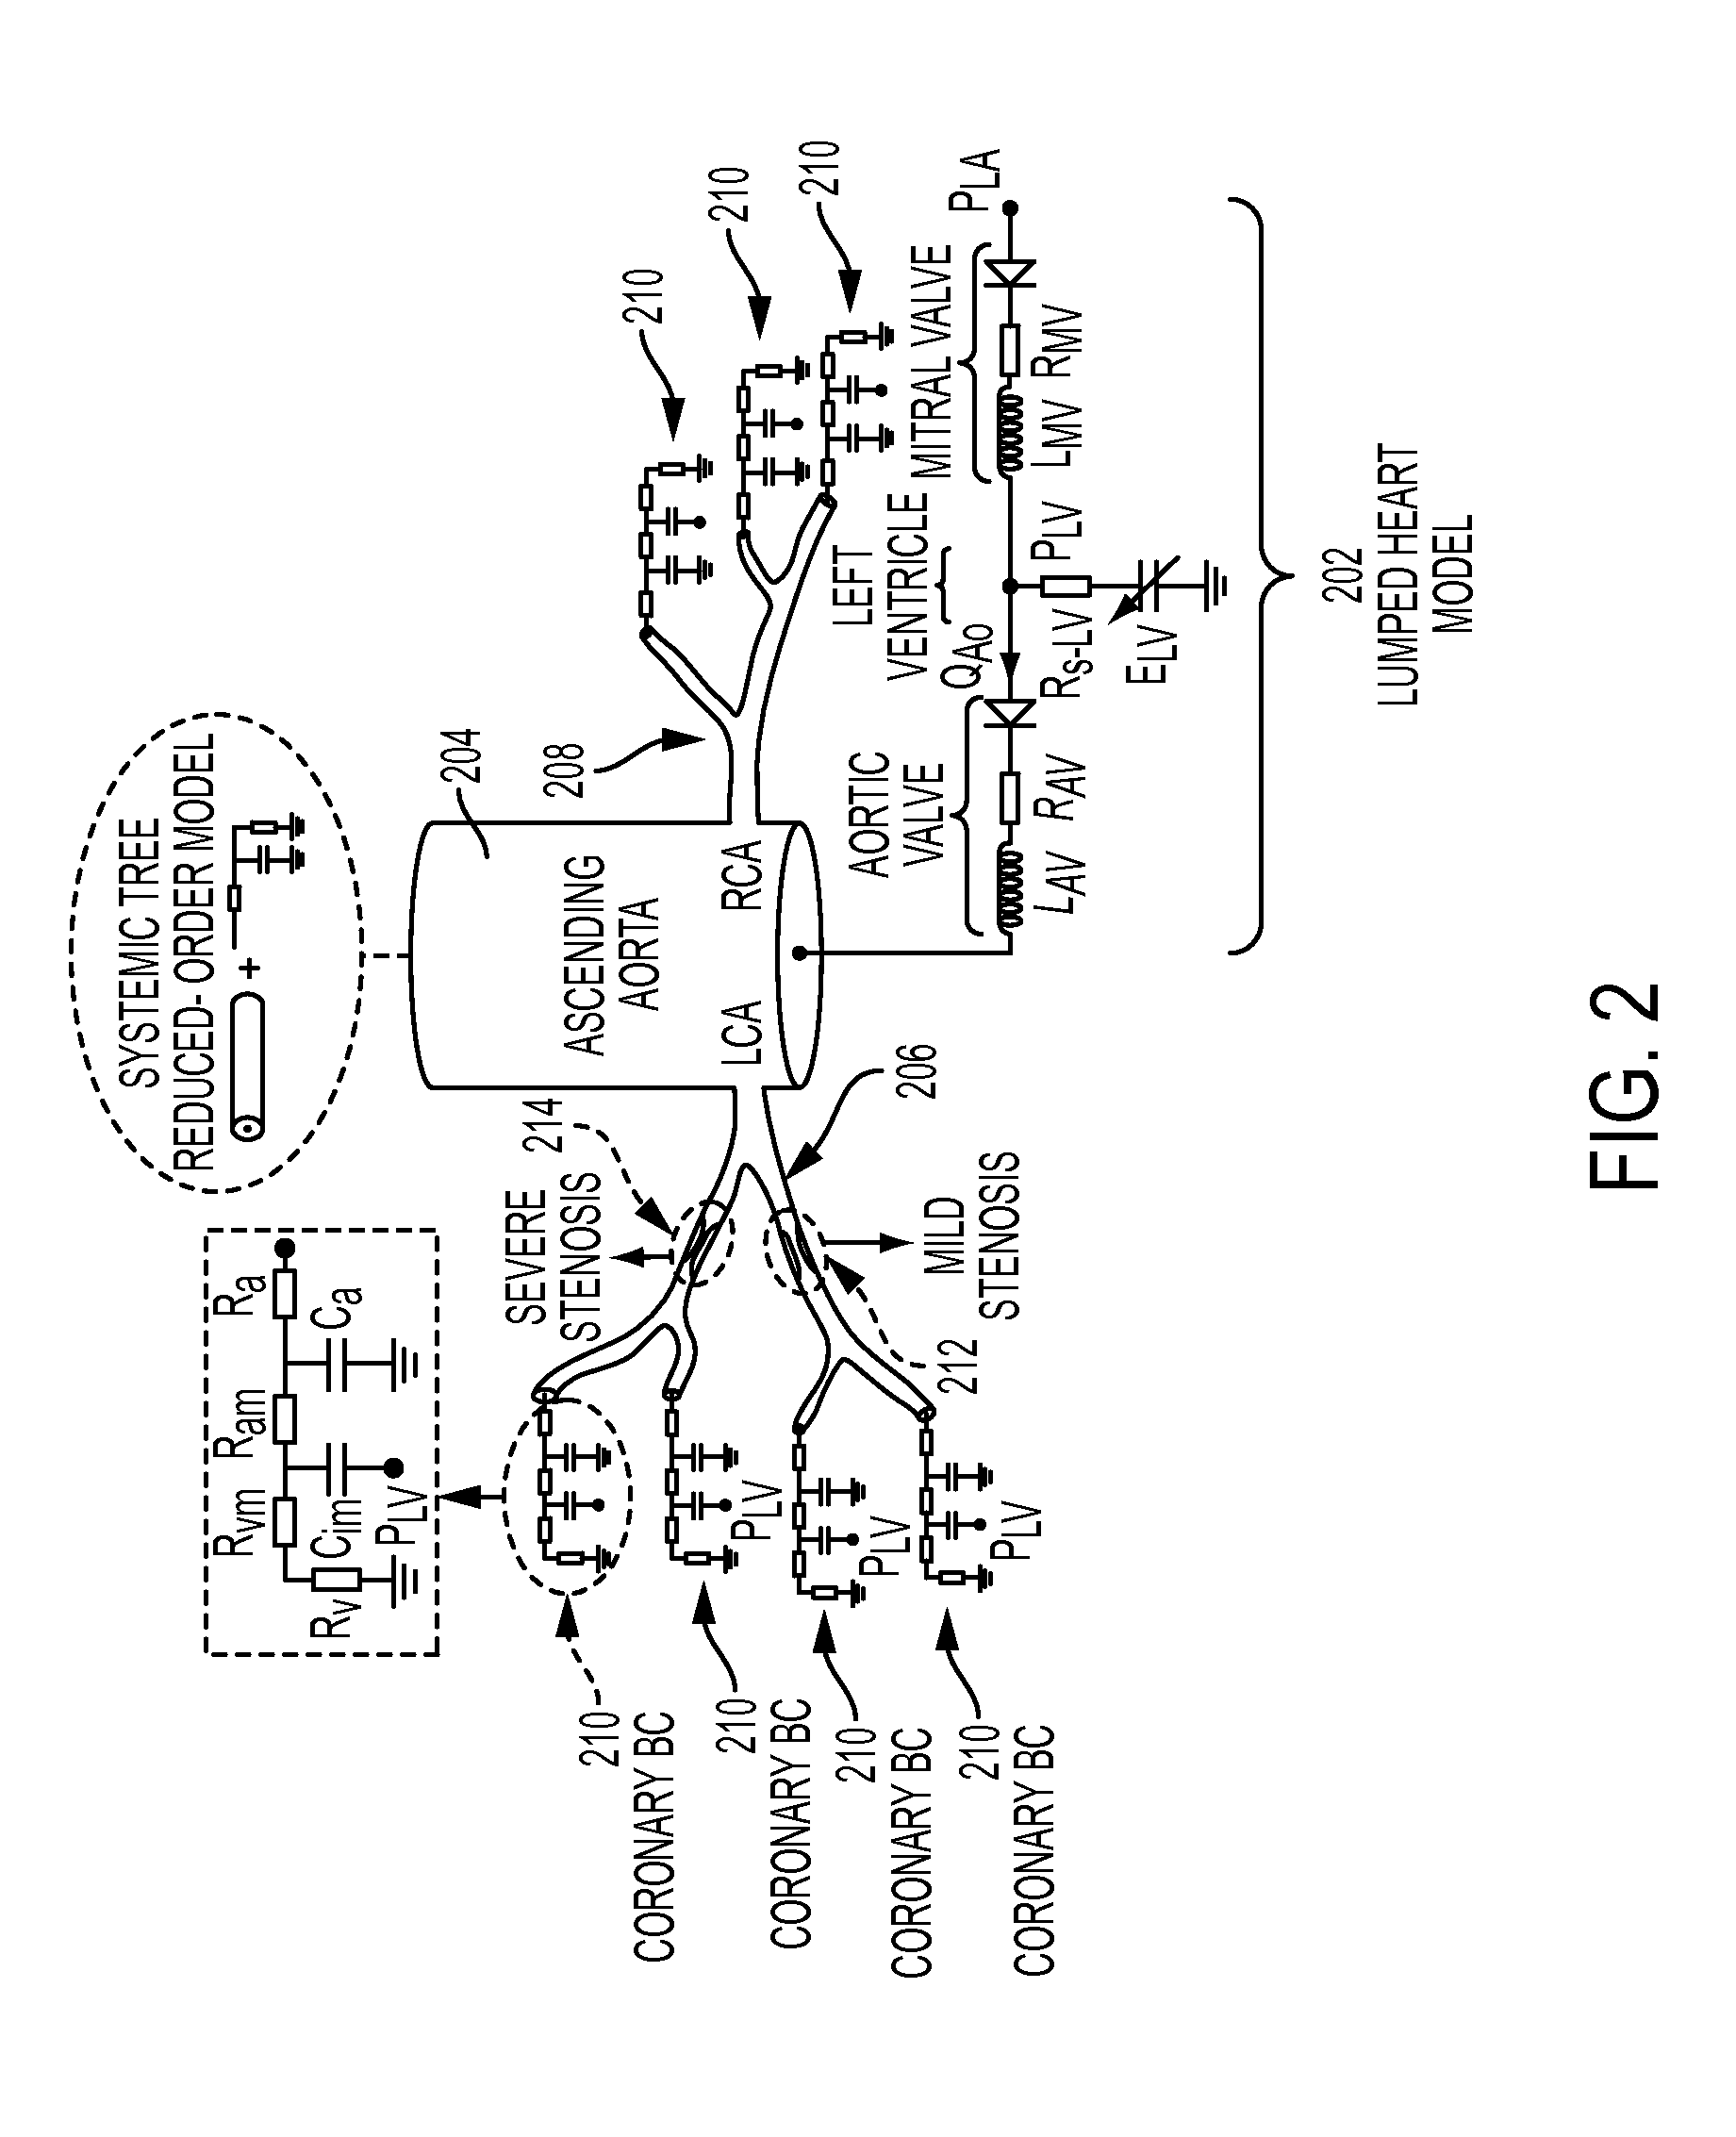 Method and System for Non-Invasive Computation of Hemodynamic Indices for Coronary Artery Stenosis